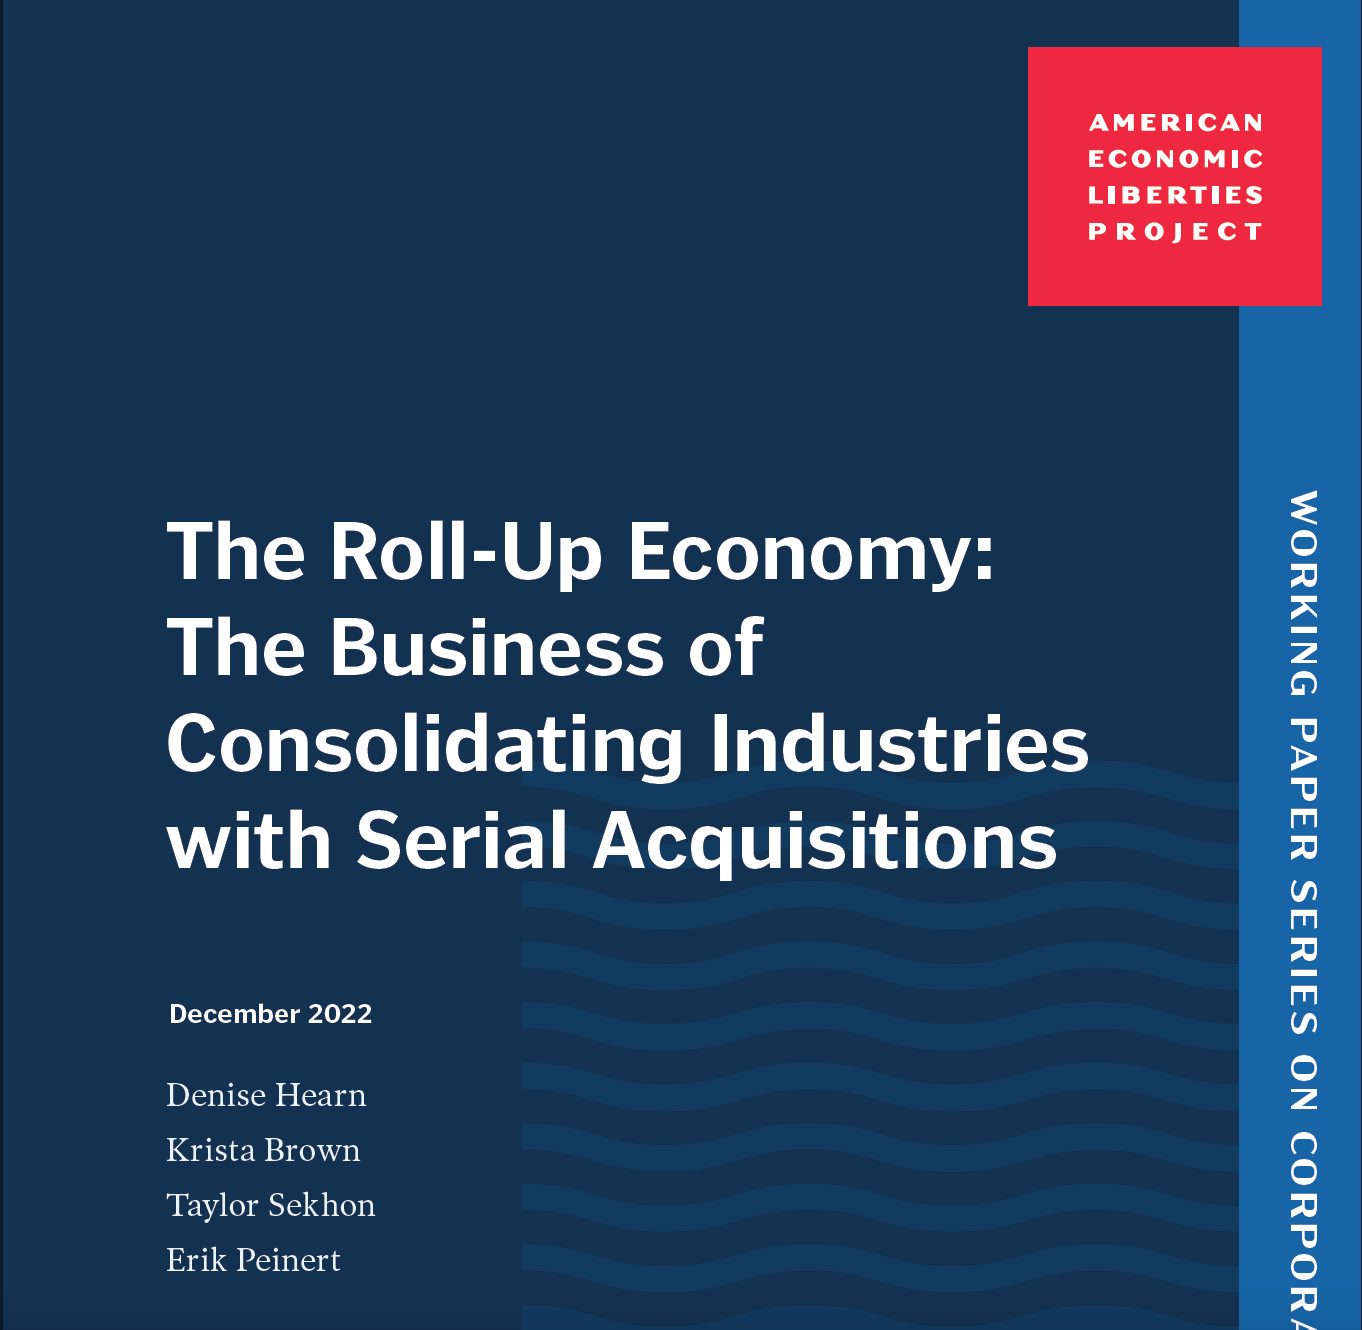 A Massive, Hidden Force Shaping the Economy: Serial Acquisitions (aka Roll-ups)